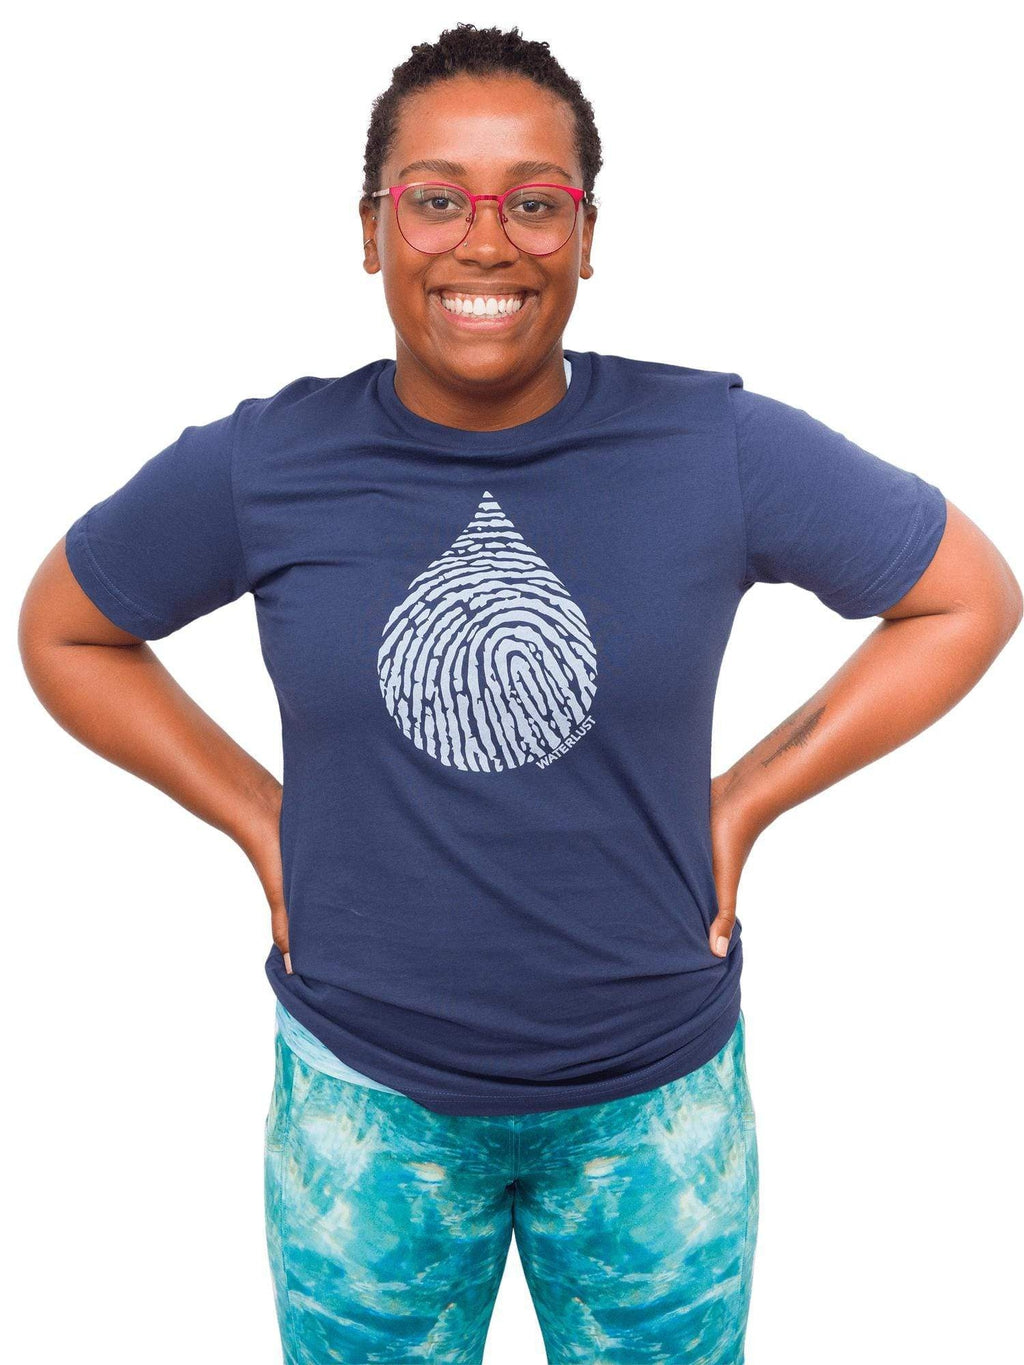 Model: Amani is the CFO of Minorities in Shark Sciences and a shark scientist. She is 5&#39;3&quot;, 160 lbs, 36C and is wearing a S tee.